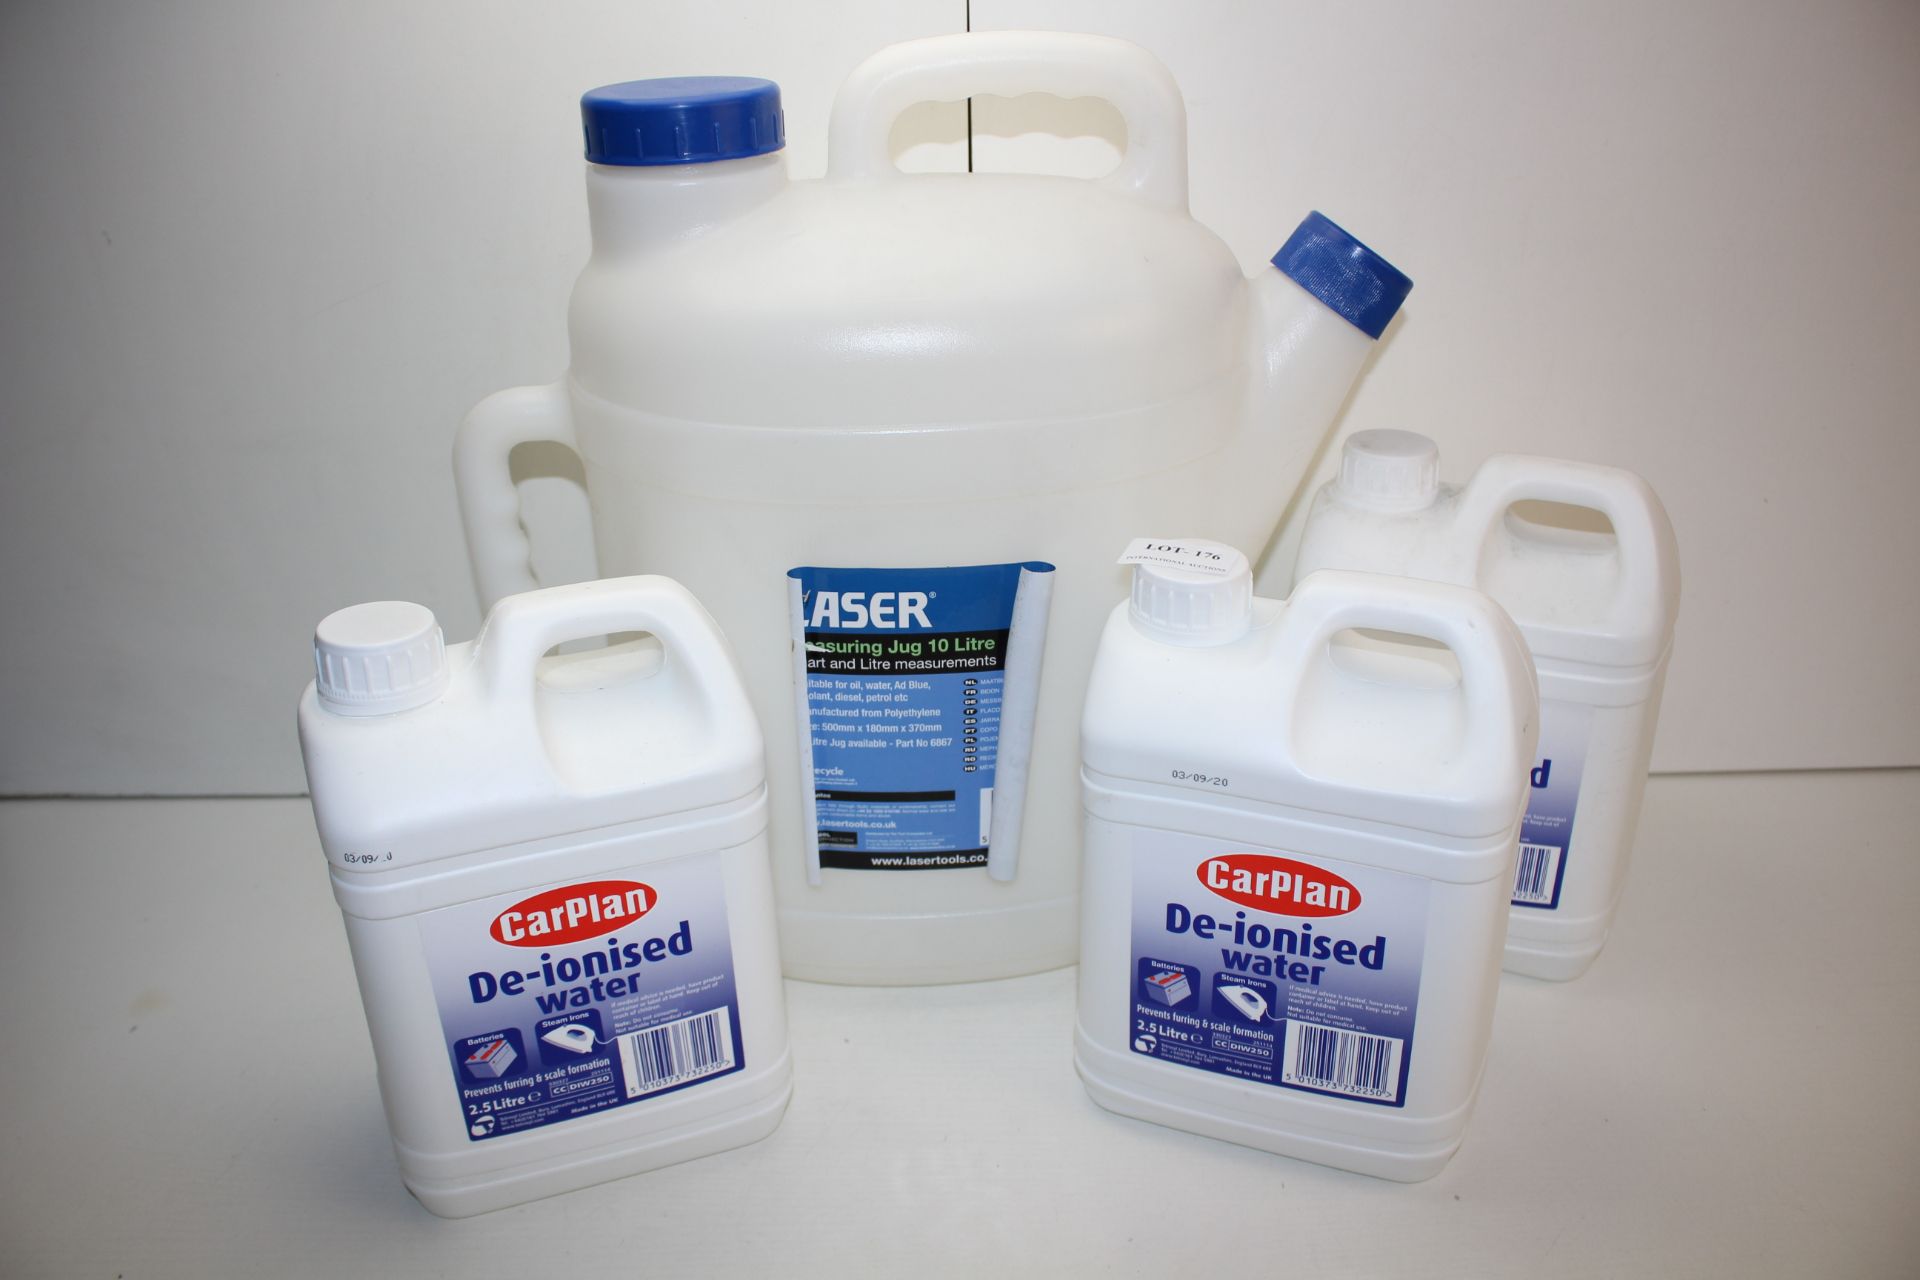 4X ASSORTED ITEMS TO INCLUDE LASER MEASURING JUG 10LITRE & CAR PLAN DE-IONISED WATER Condition